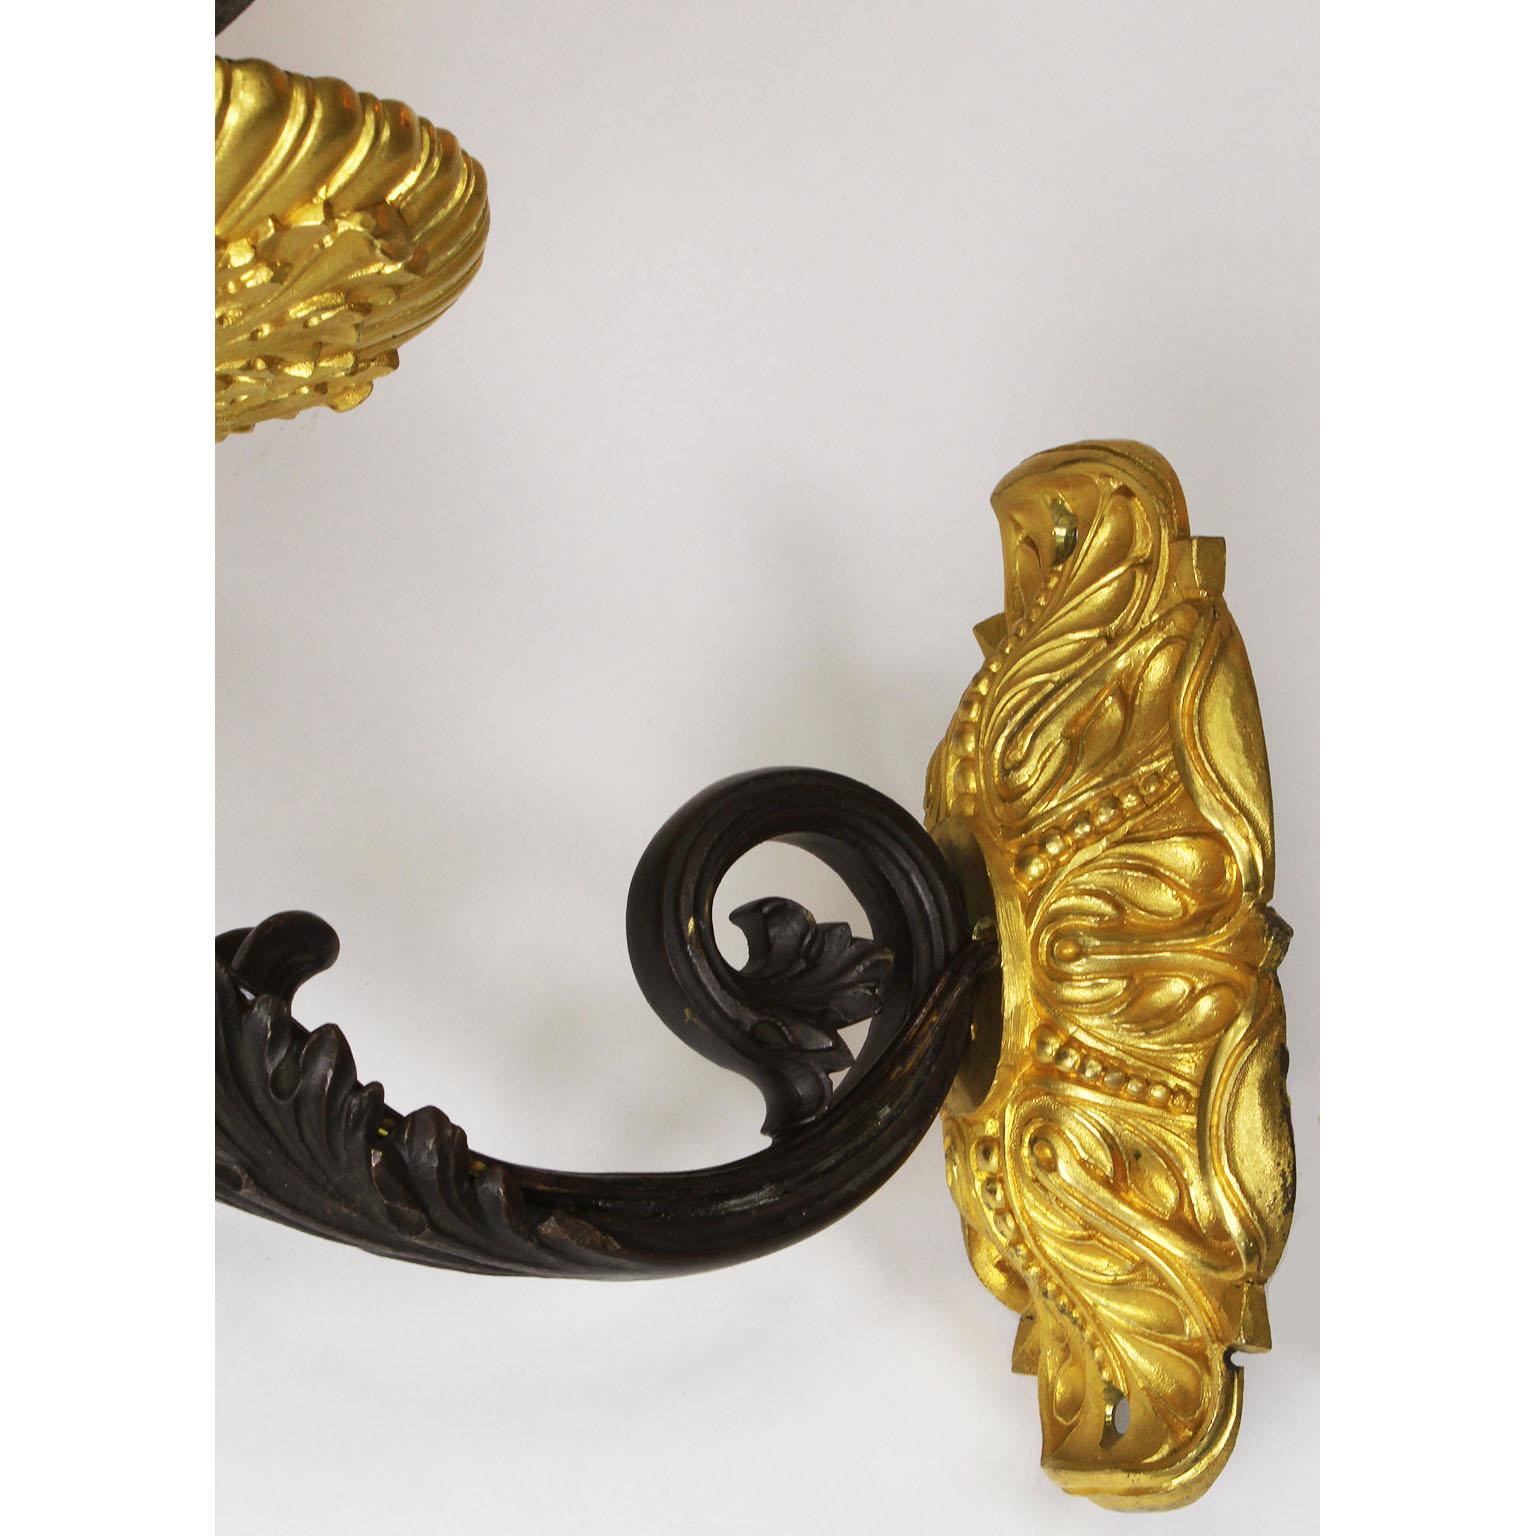 French 19th Century Neoclassical Empire Revival Style Bronze Wall Sconces, Pair For Sale 4